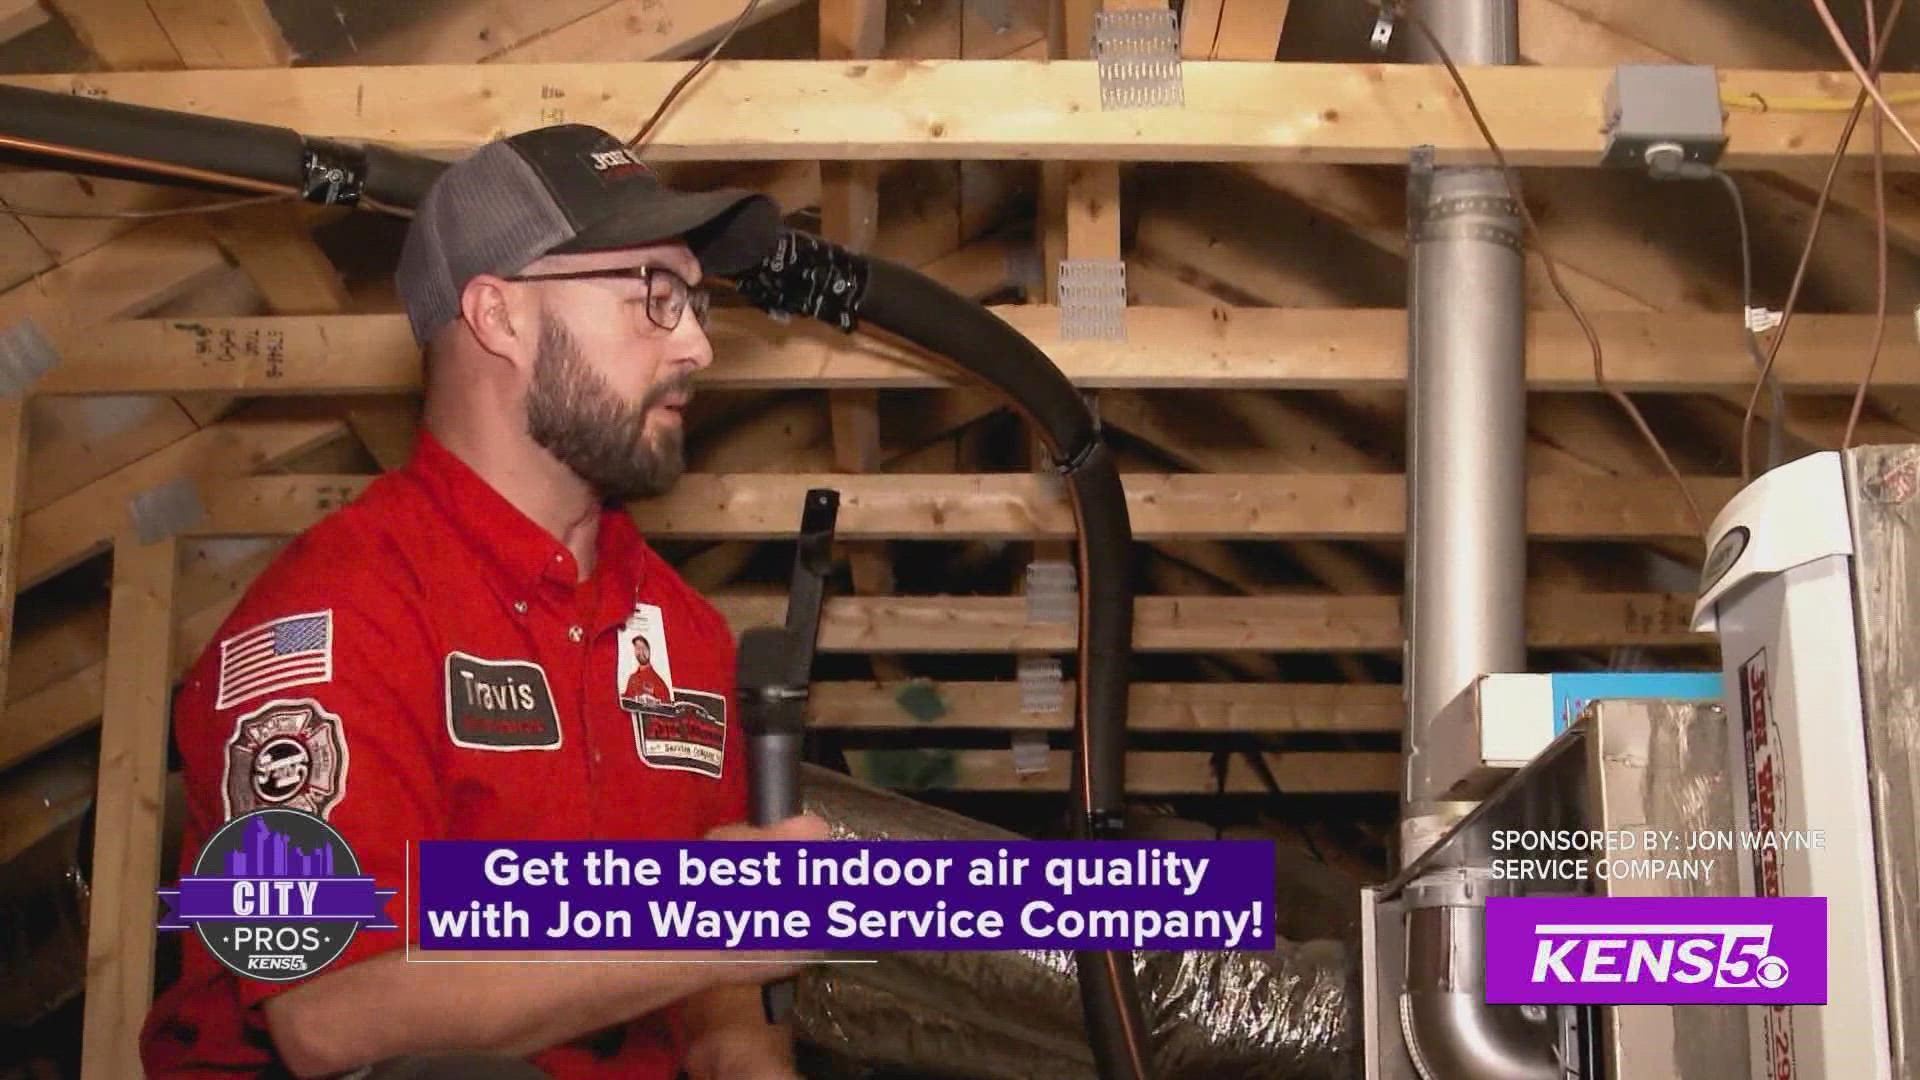 If you're concerned about the air quality in your home...today's City Pro could have a solution for you. Segment Sponsor: Jon Wayne Service Company.